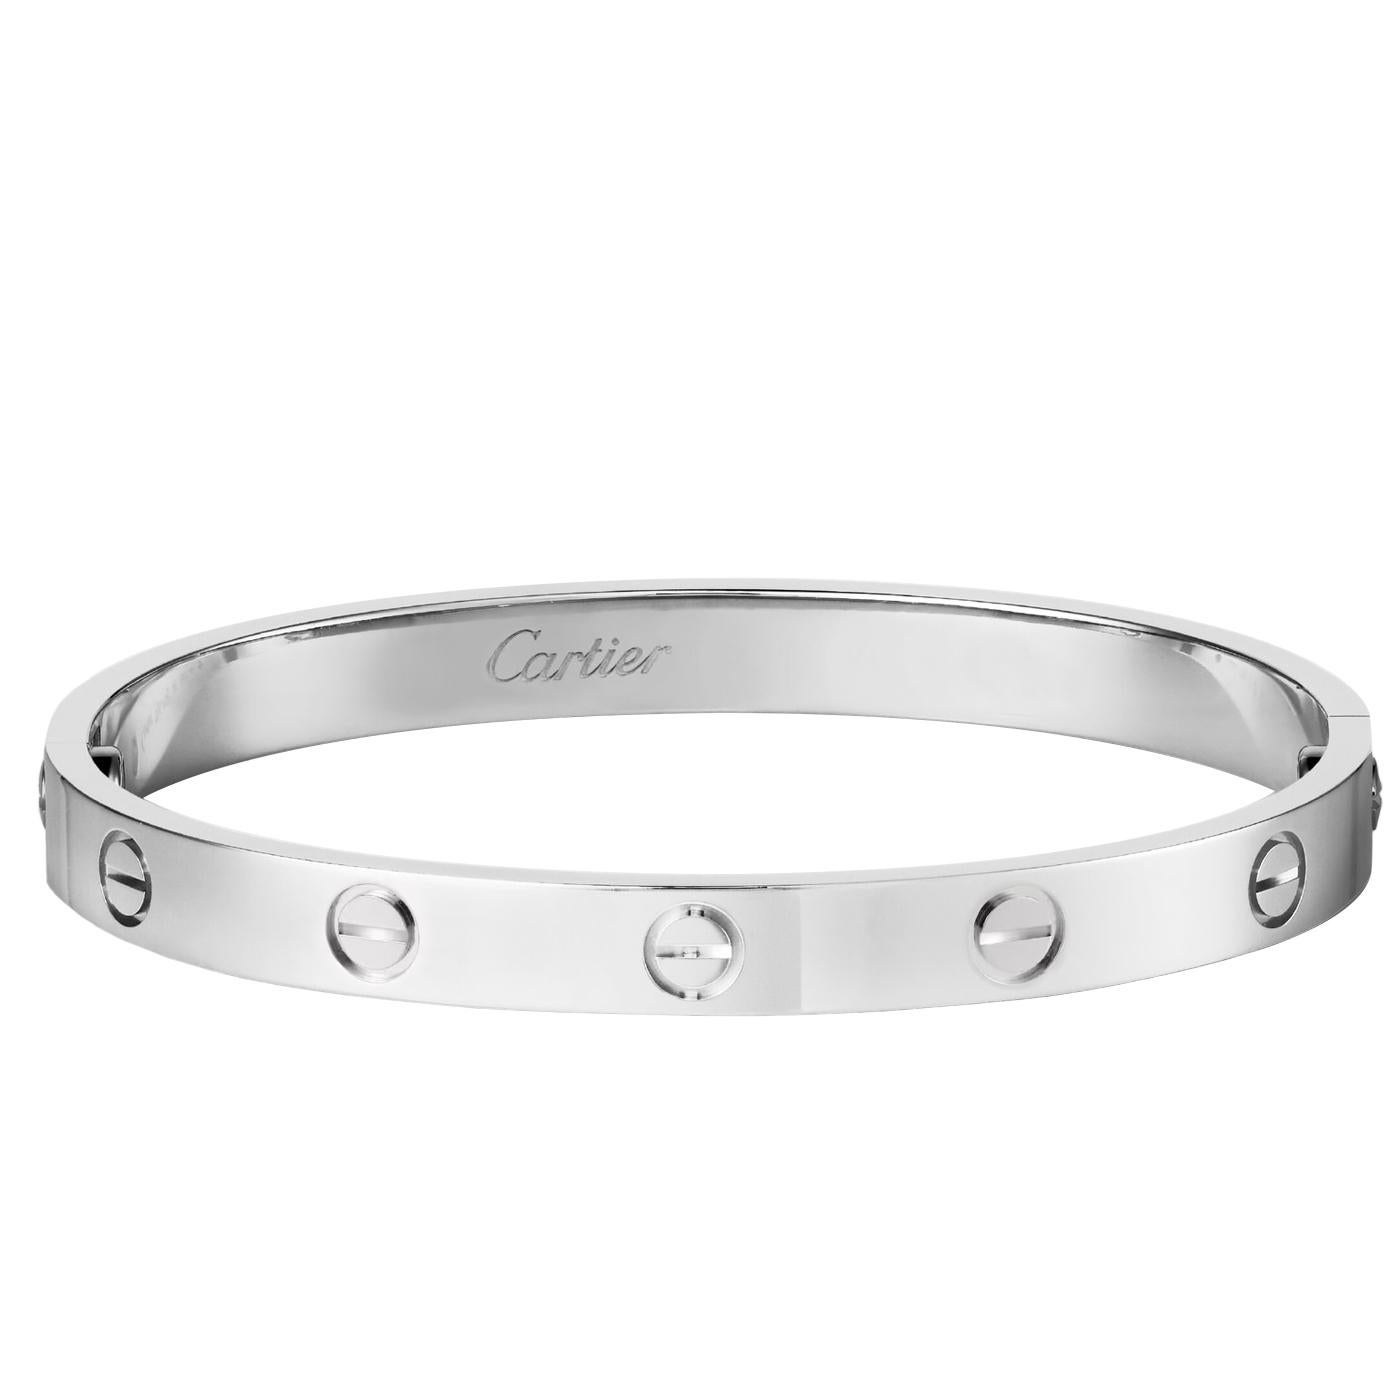 LOVE bracelet, 18K white gold (750/1000). Comes with a screwdriver. Width: 6.1 mm. Created in New York in 1969, the LOVE bracelet is an icon of jewelry design: a close-fitting, oval bracelet composed of two rigid arcs which are worn on the wrist and